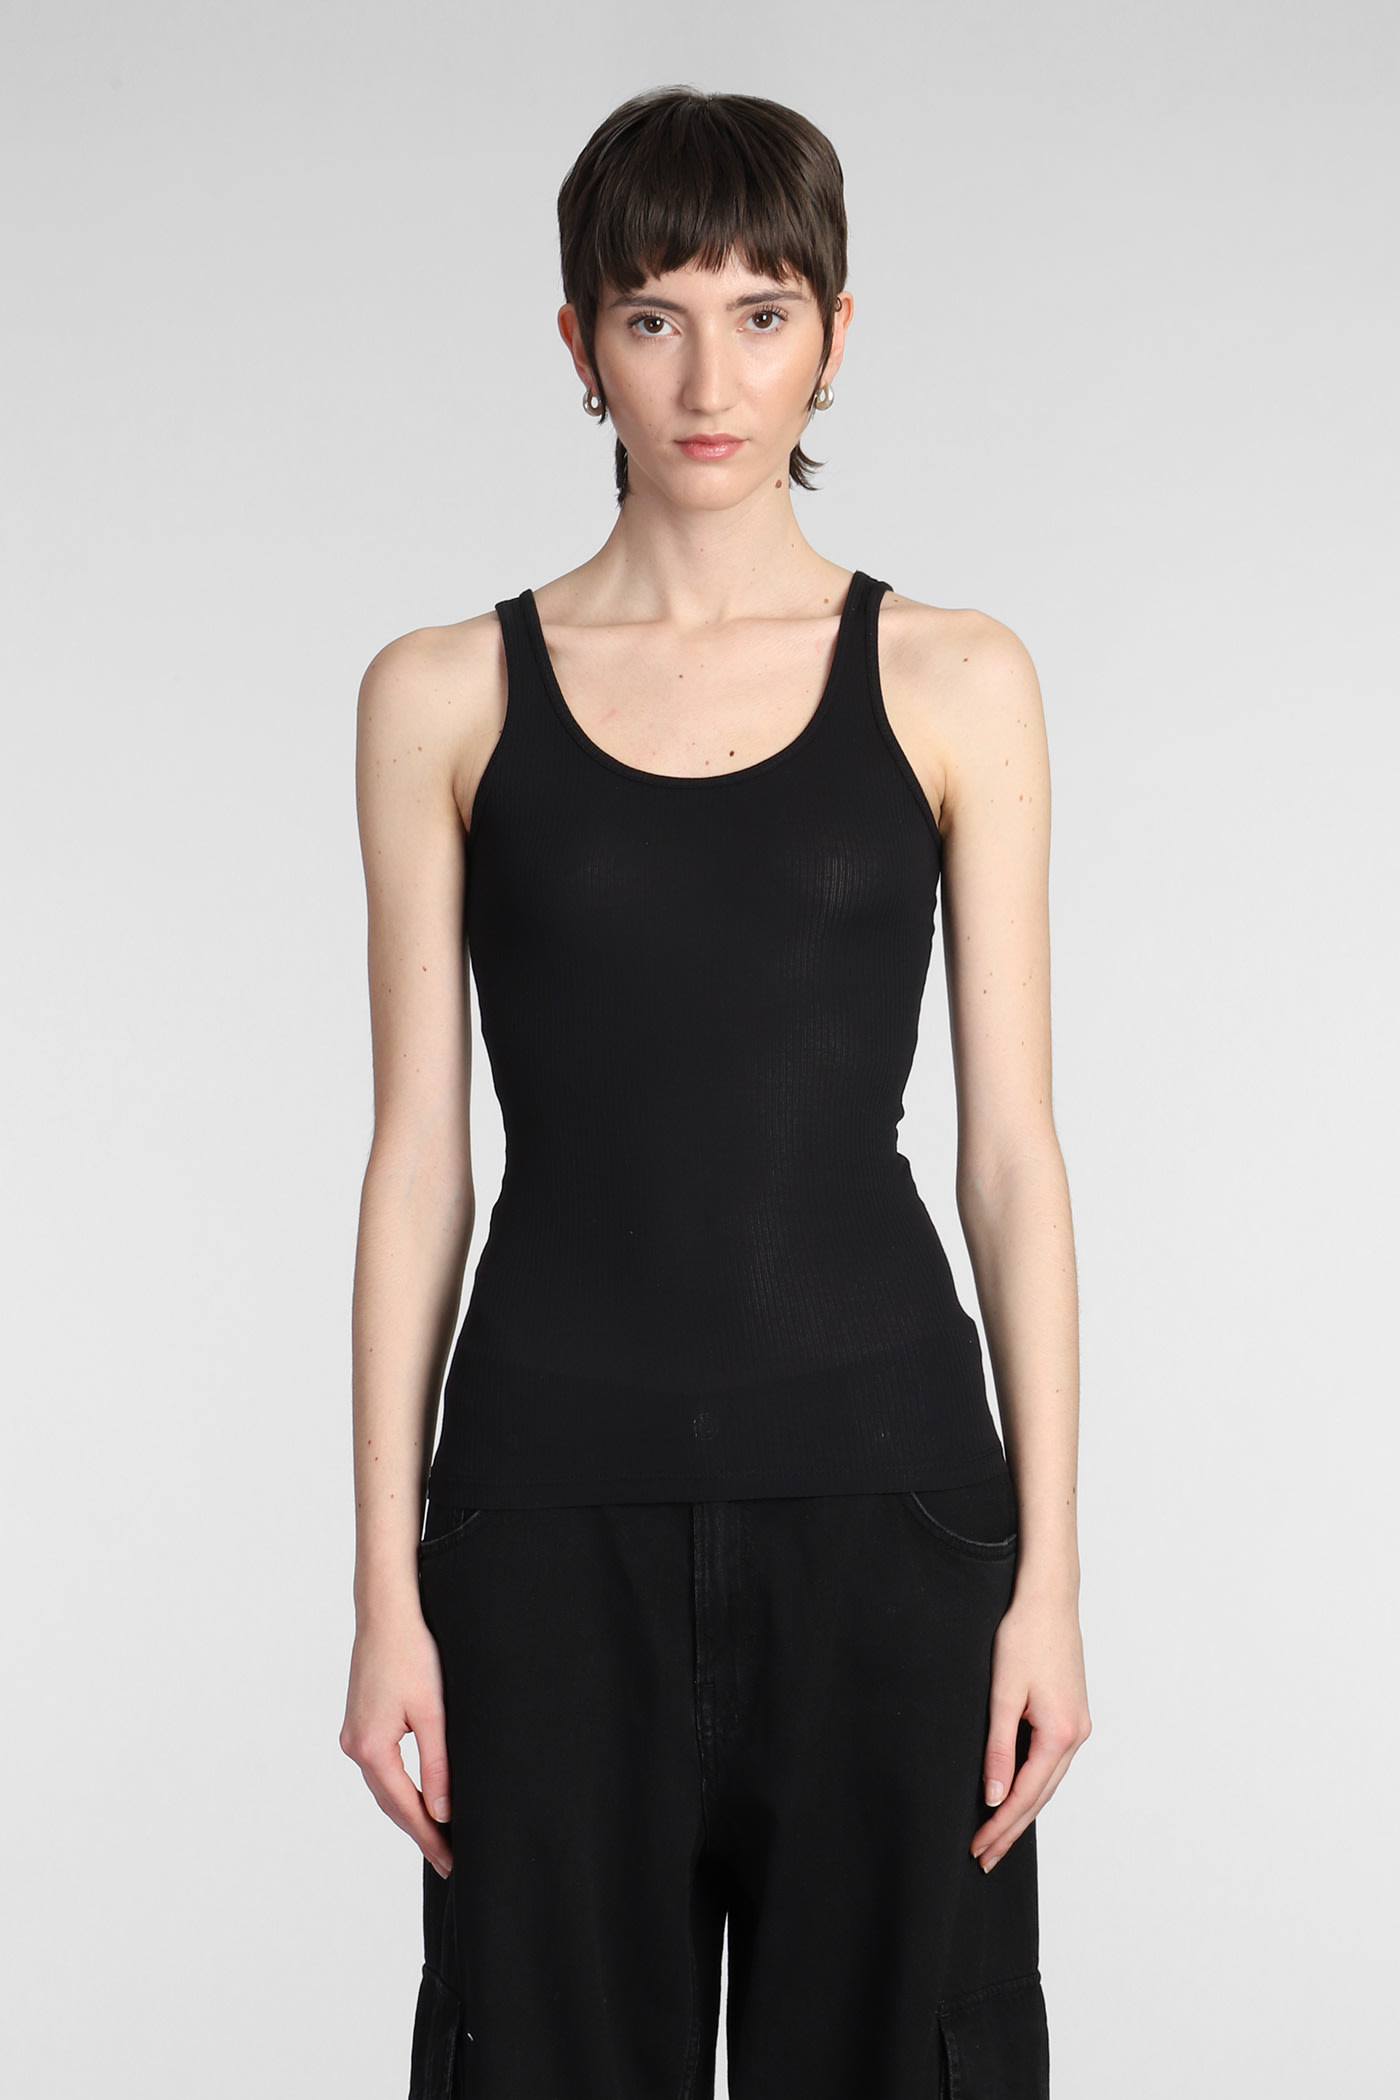 JAMES PERSE TANK TOP IN BLACK COTTON